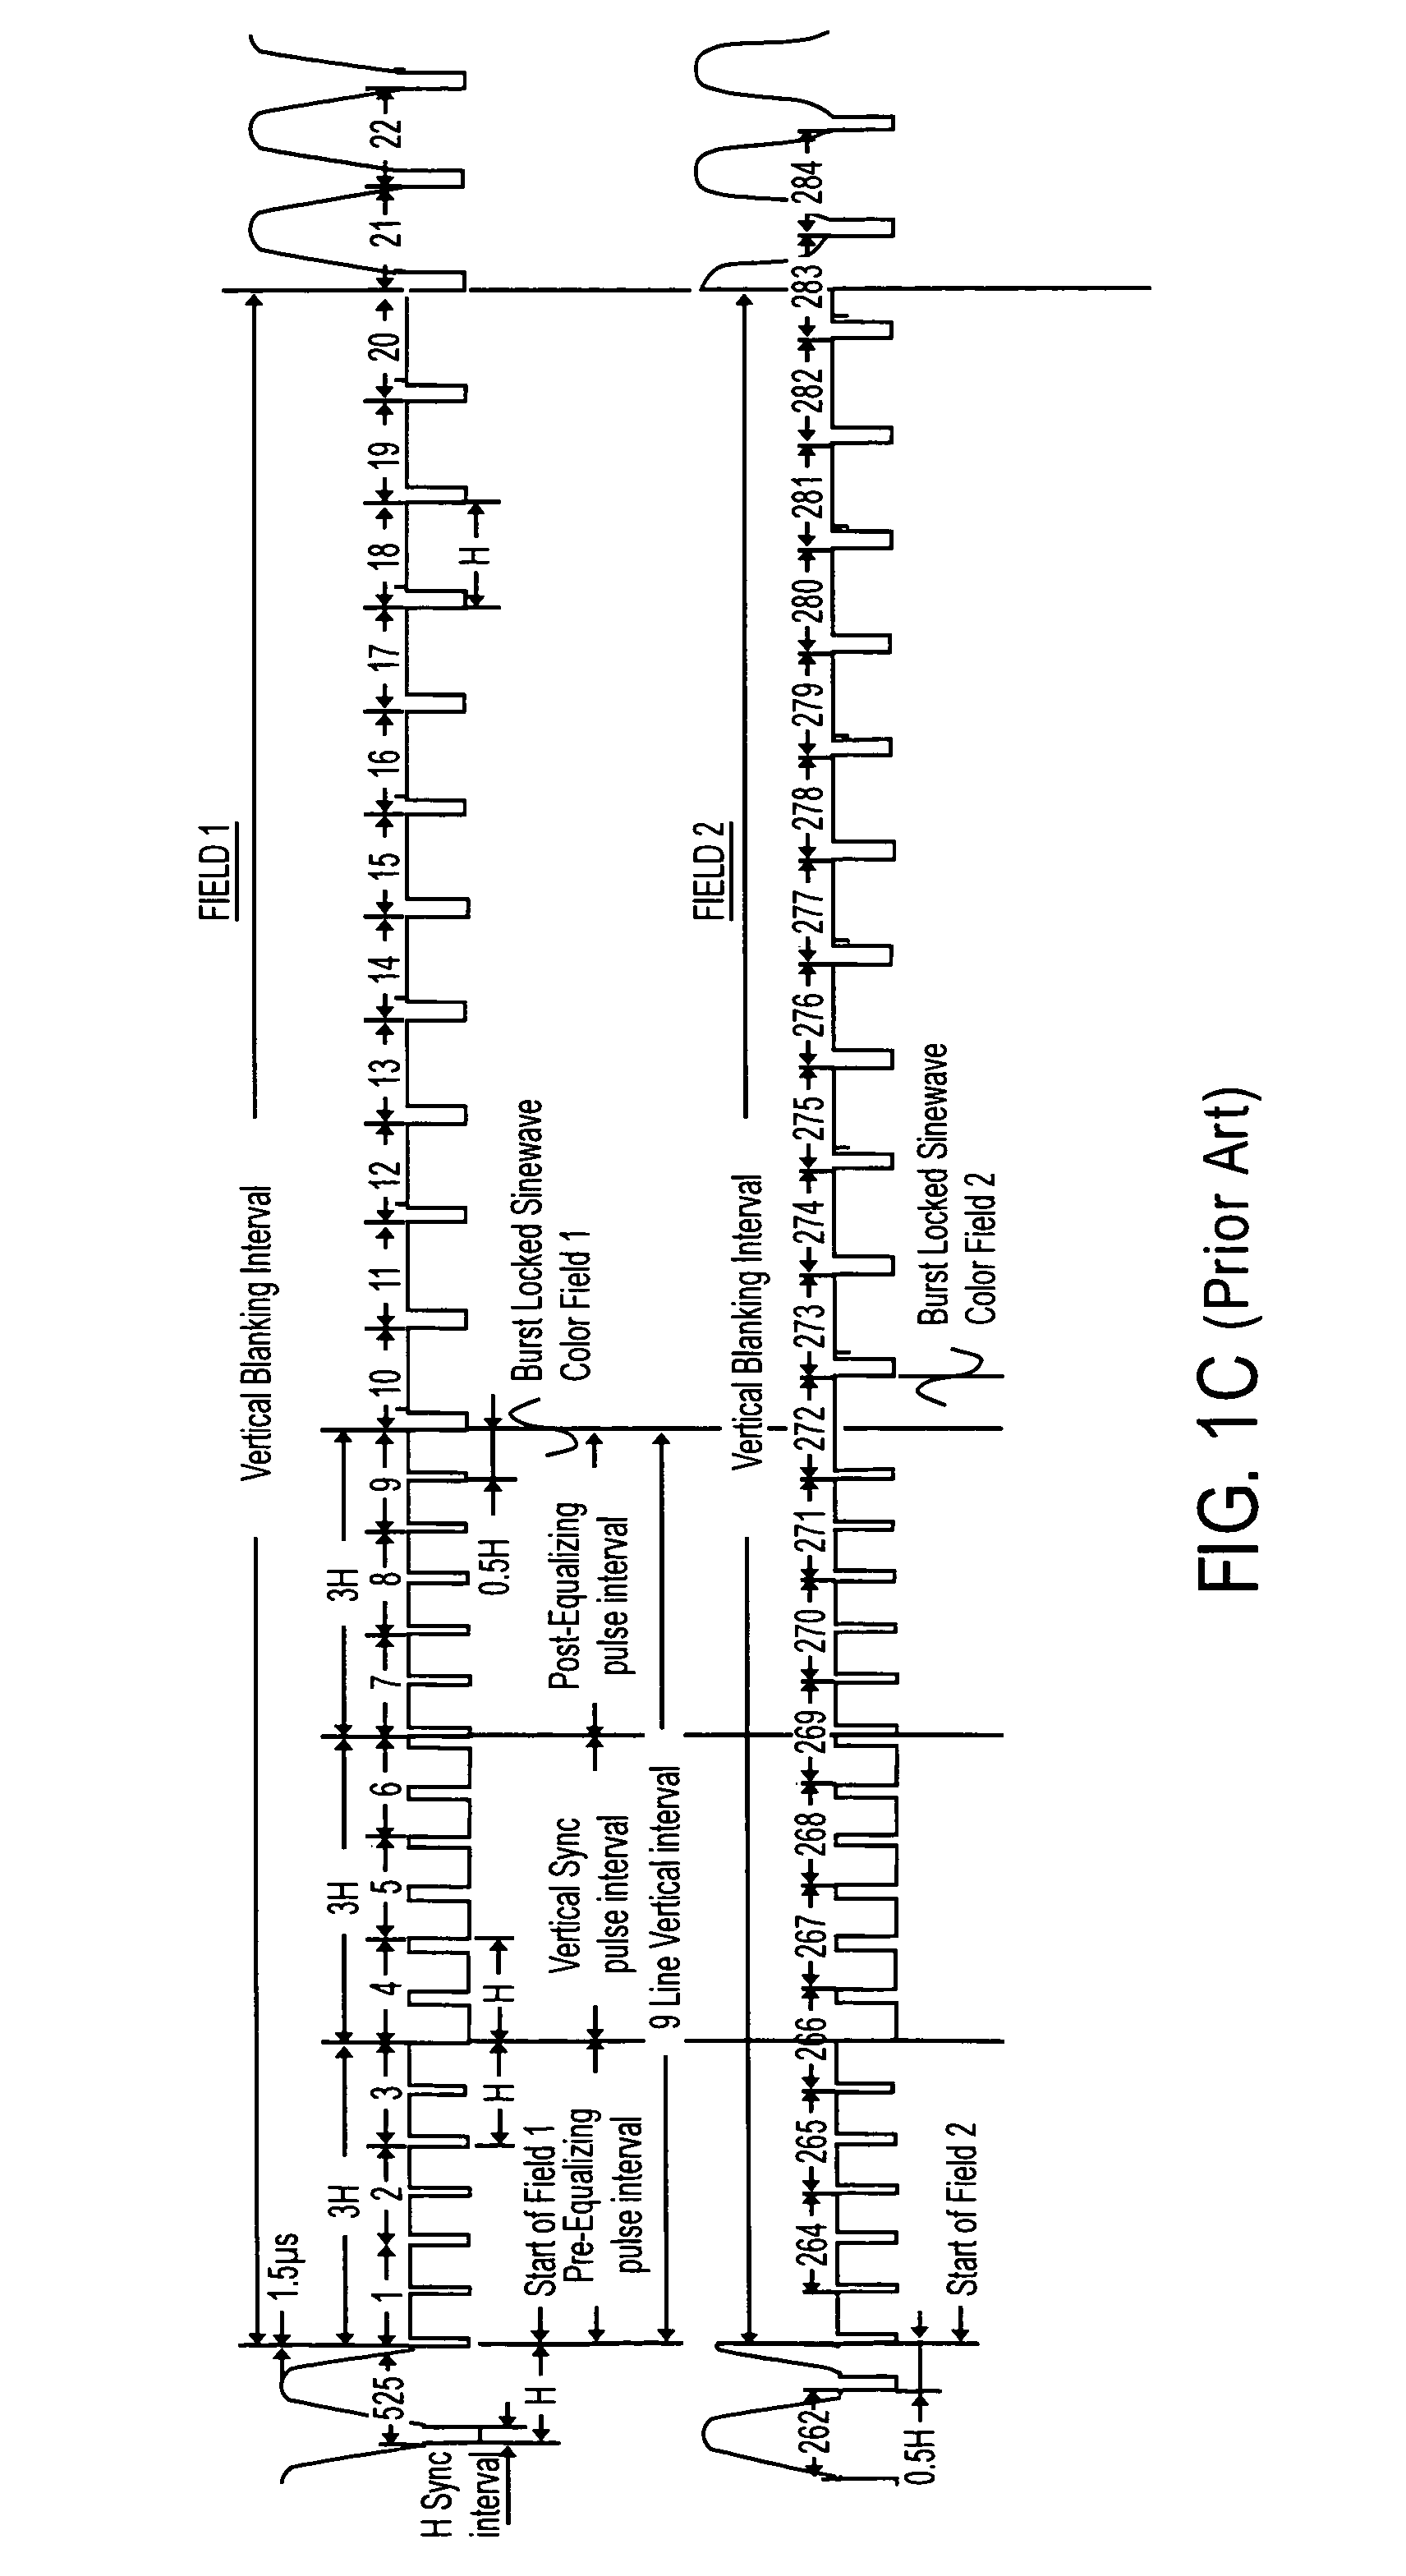 Method and apparatus for synthesizing copy protection for reducing/defeating the effectiveness or capability of a circumvention device